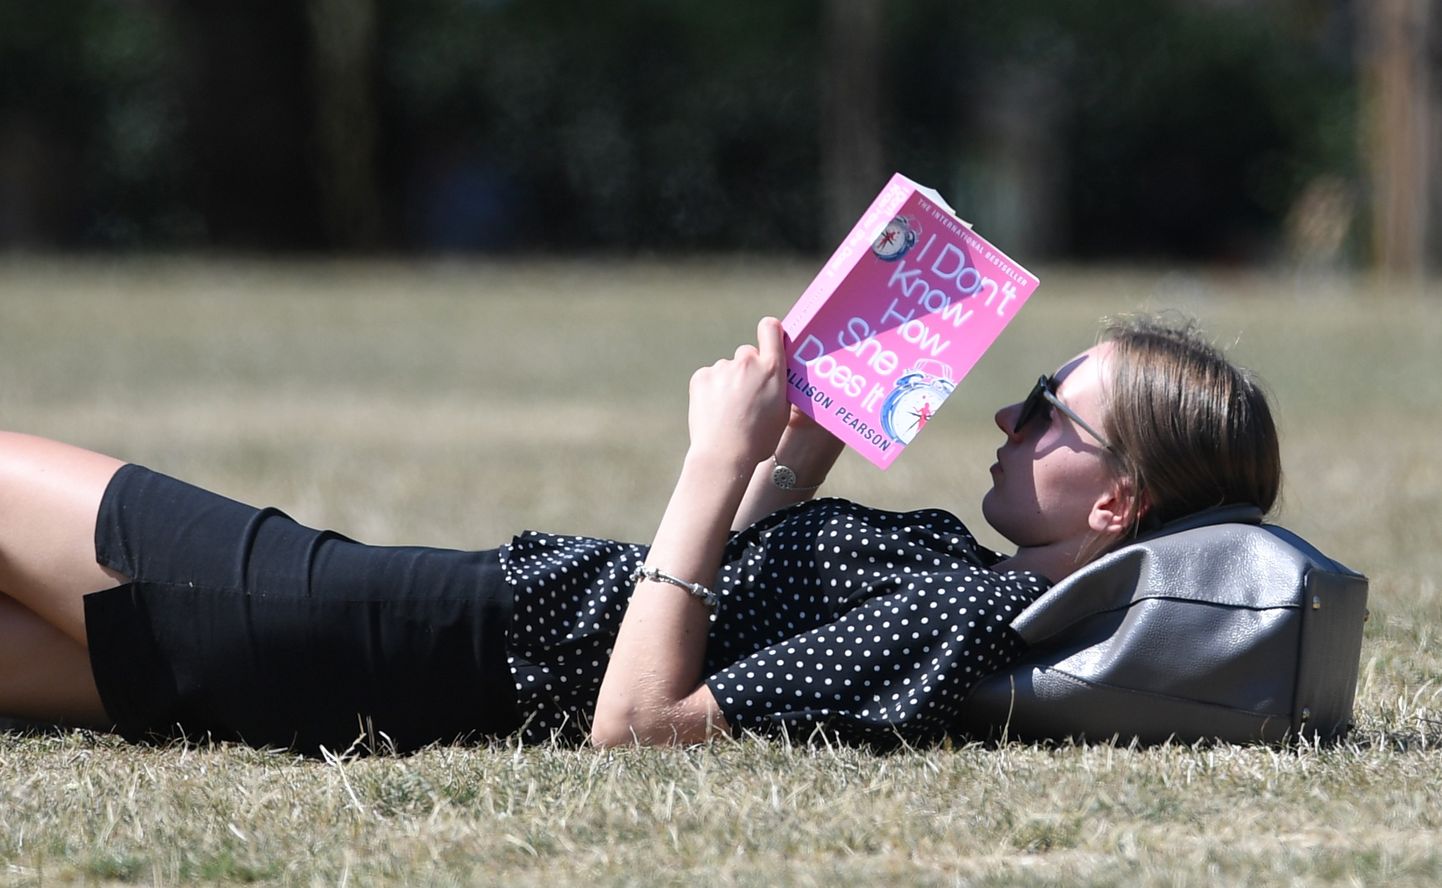 A woman reads a book in Green Park in London, Britain, 03 August 2018. Health warnings have been issued this week after forecasters predicted a second heatwave this weekend, with temperatures predicted to reach 31 centigrades in London.  EPA/FACUNDO ARRIZABALAGA